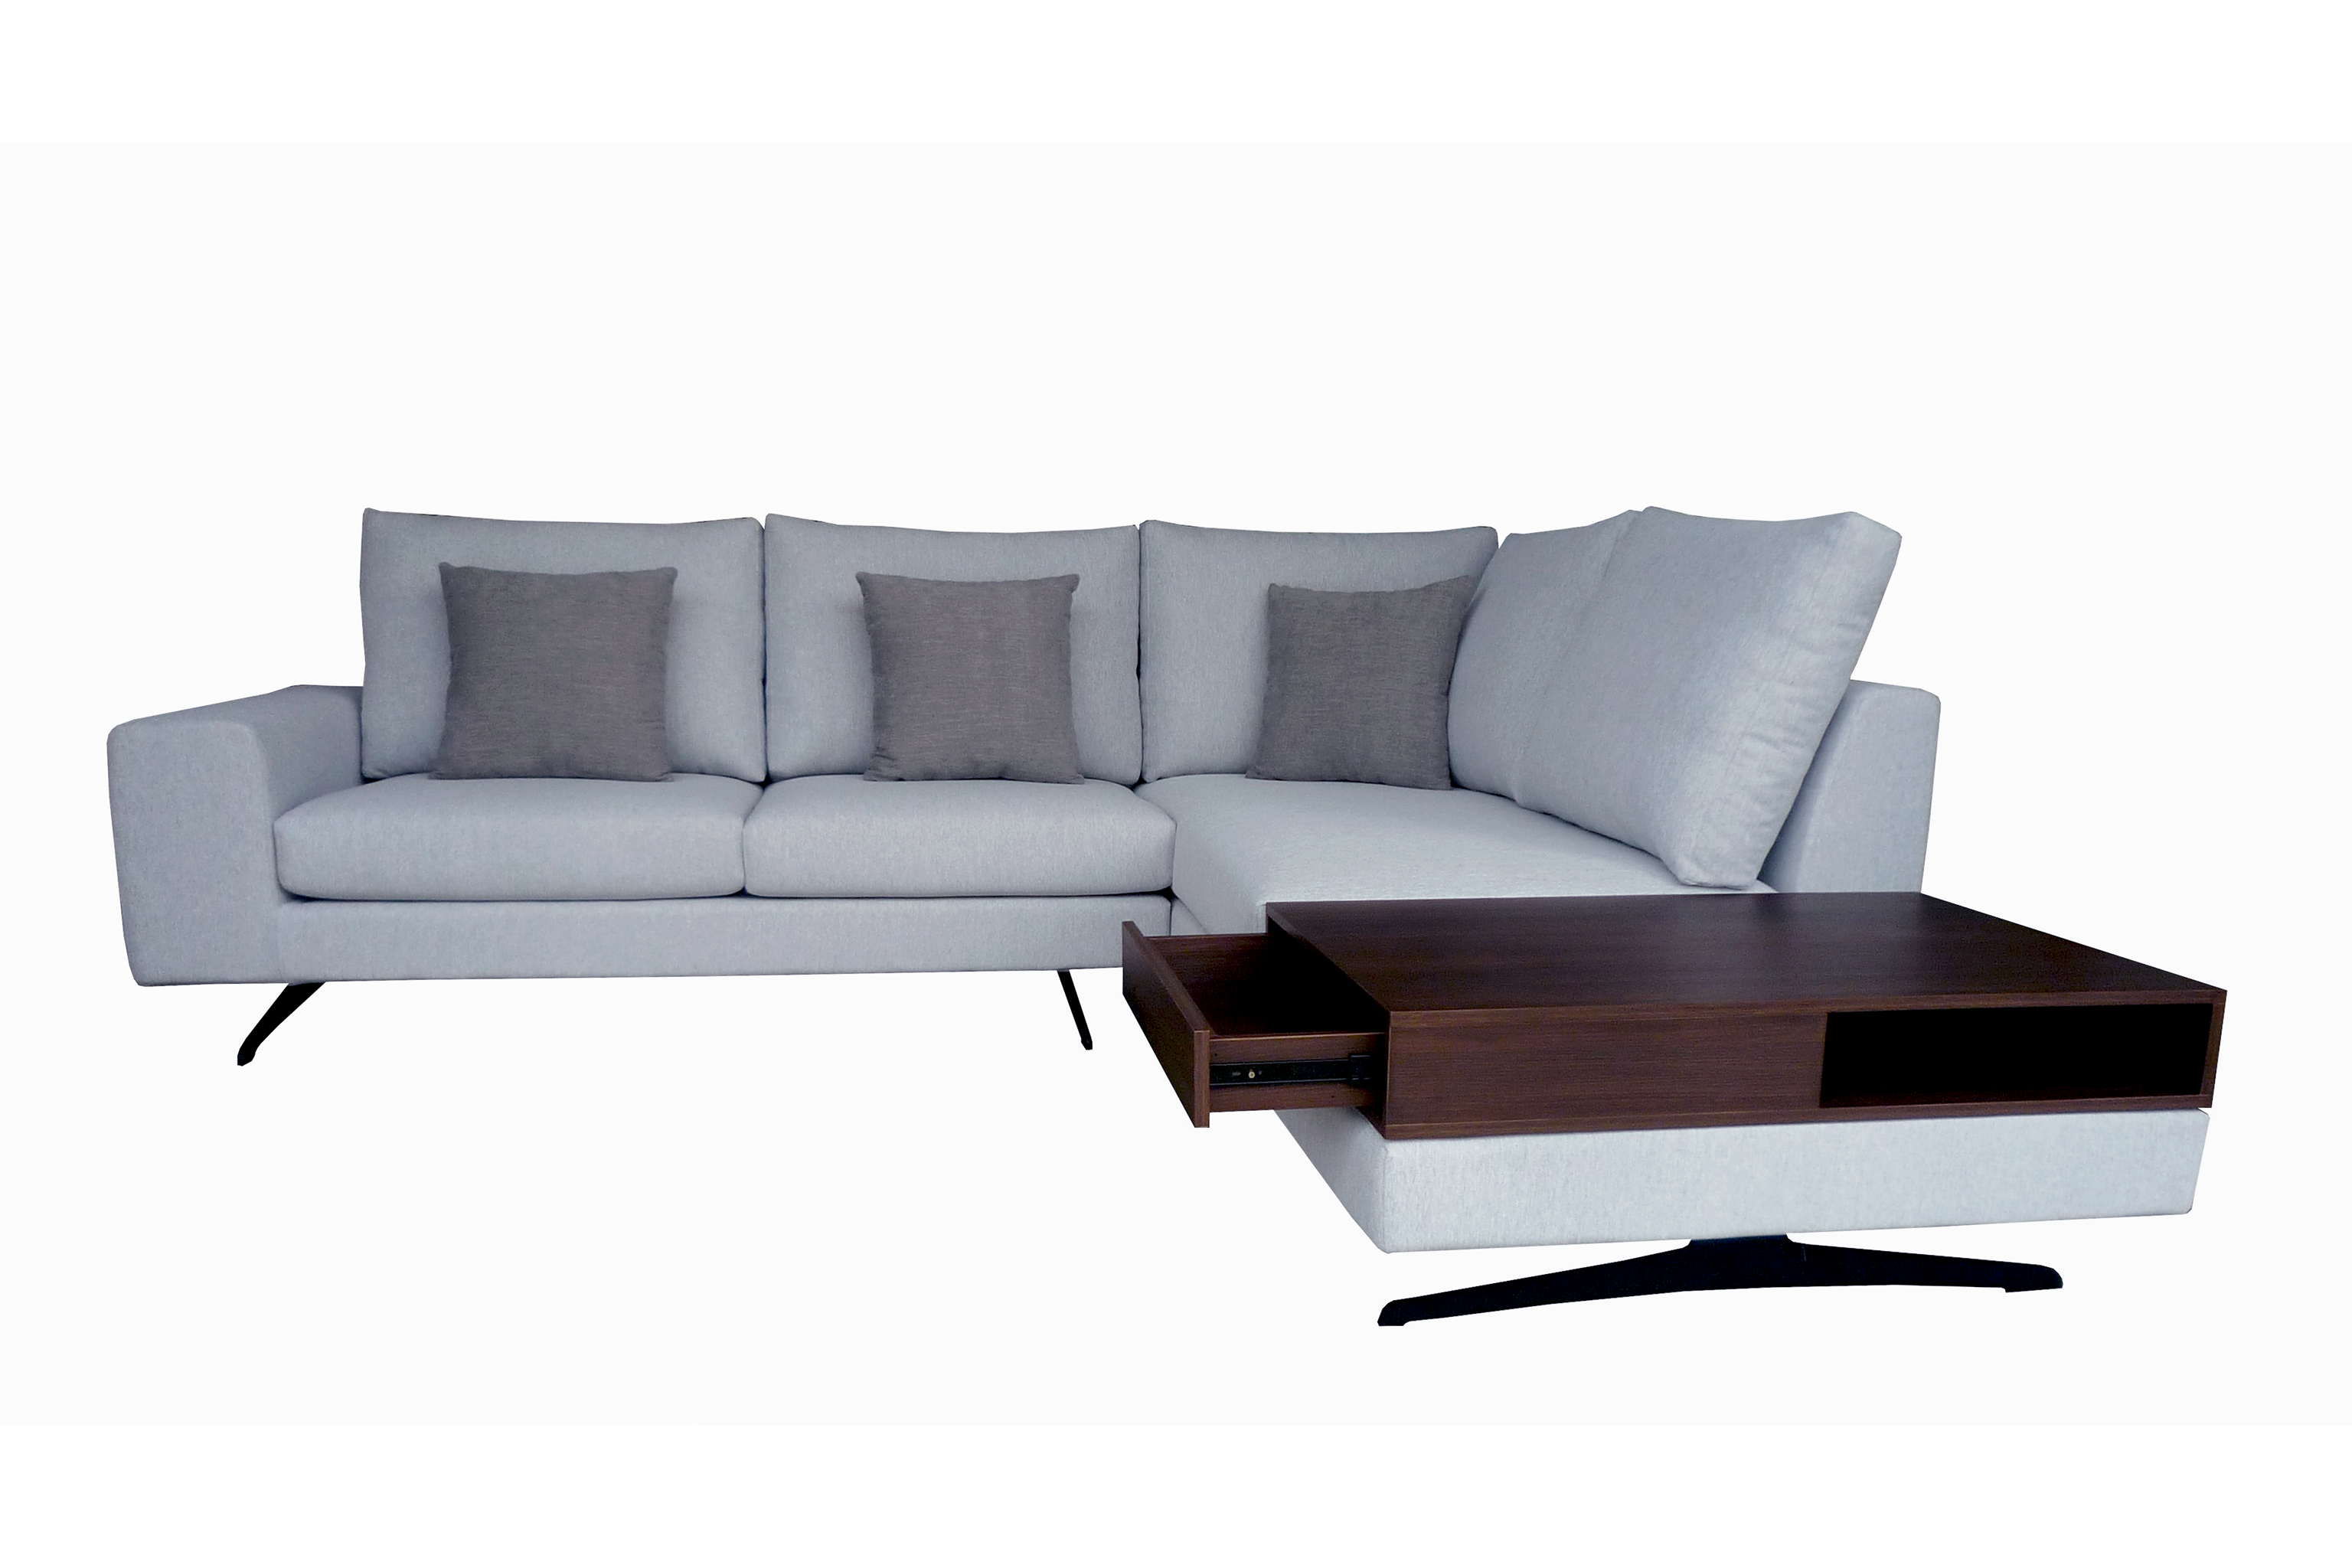 FREESIA Sectional Sofa in Fabric by Castilla